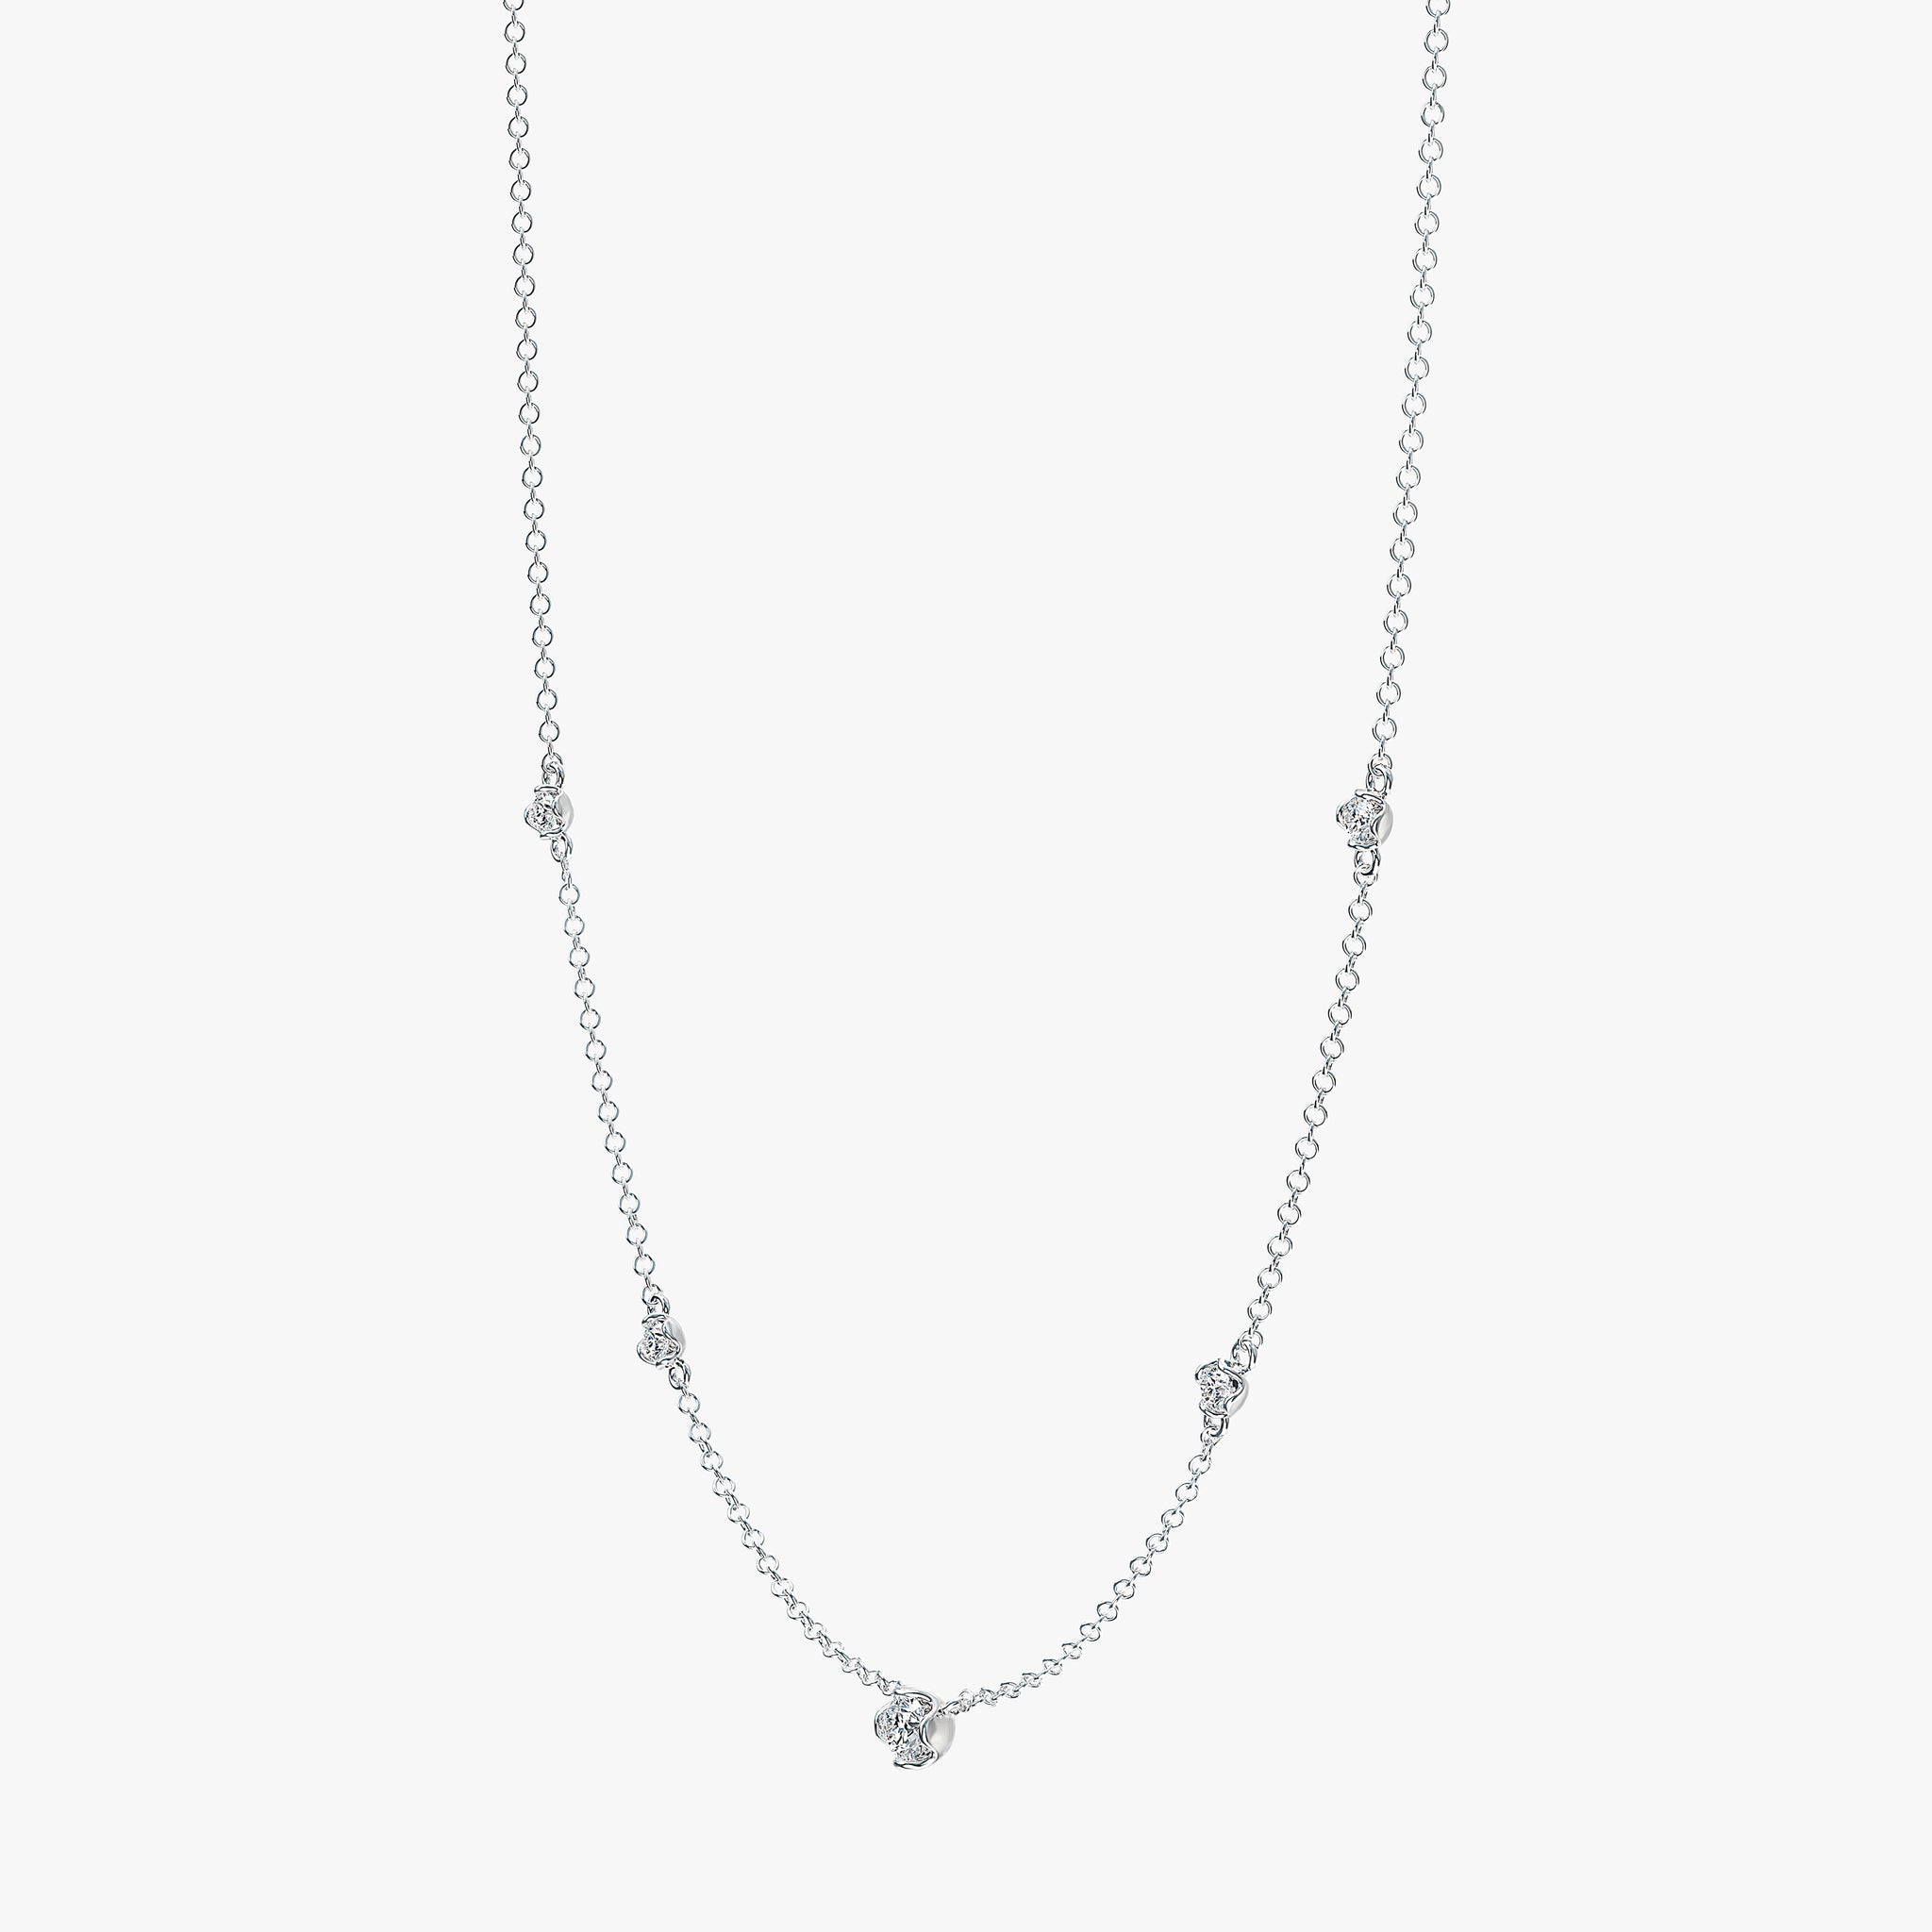 J'EVAR 14KT White Gold By The Yard ALTR Lab Grown Diamond Necklace Perspective View | 0.35 CT